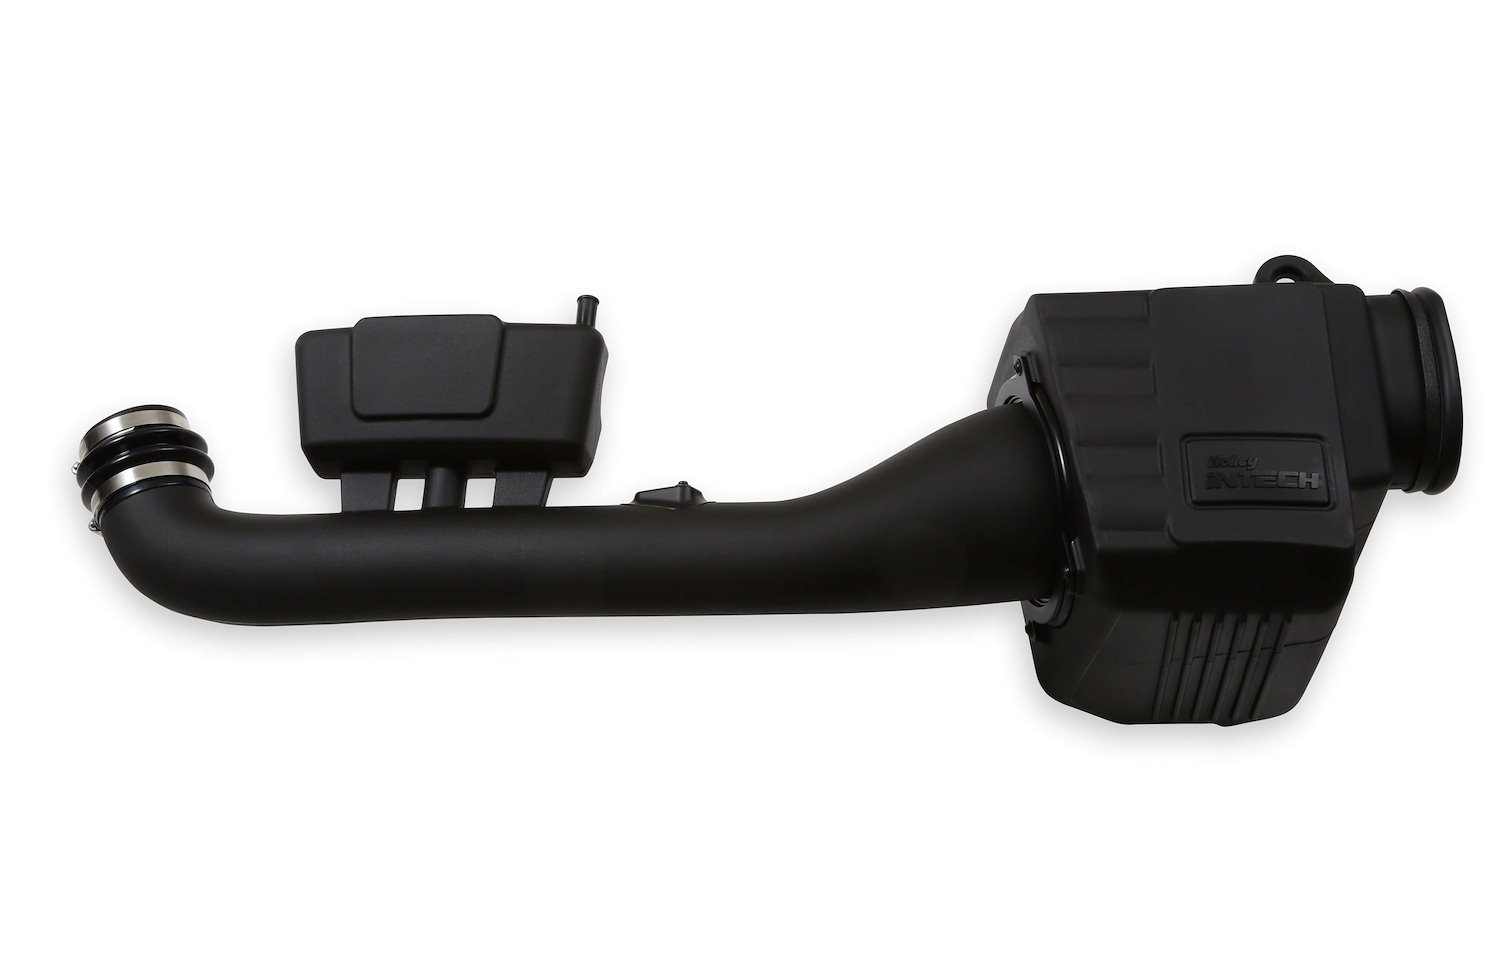 iNTECH Cold Air Intake Fits Nissan Frontier, Pathfinder, Xterra 4.0L V6 [Select 2005-2019 Models]